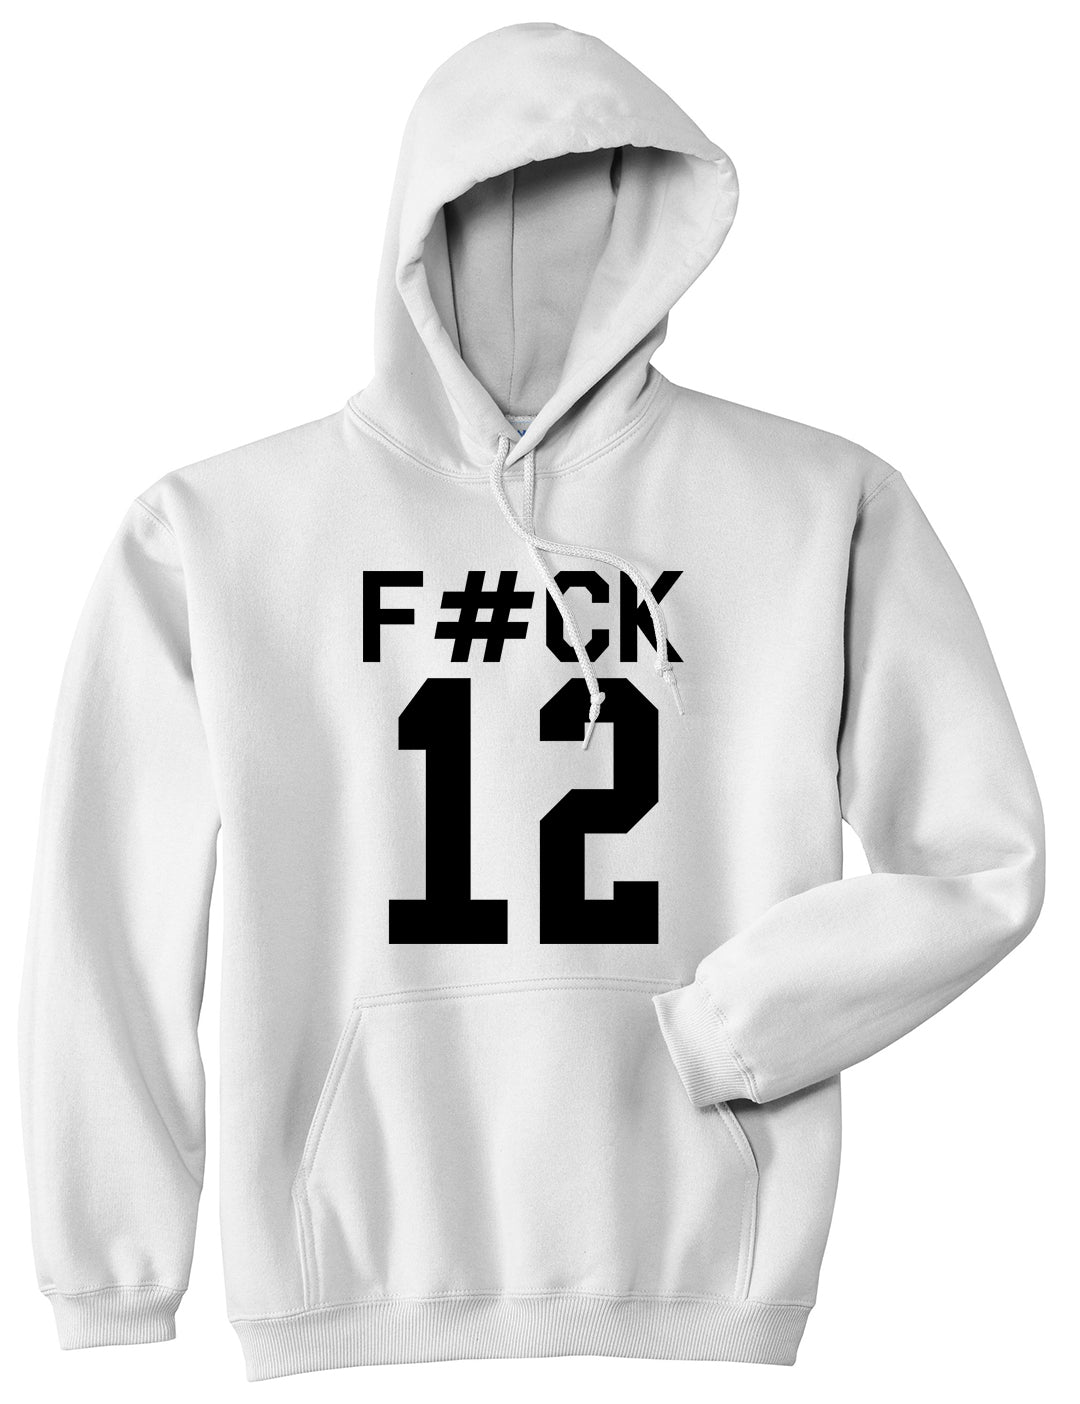 Fck 12 Police Brutality Mens Pullover Hoodie White by Kings Of NY